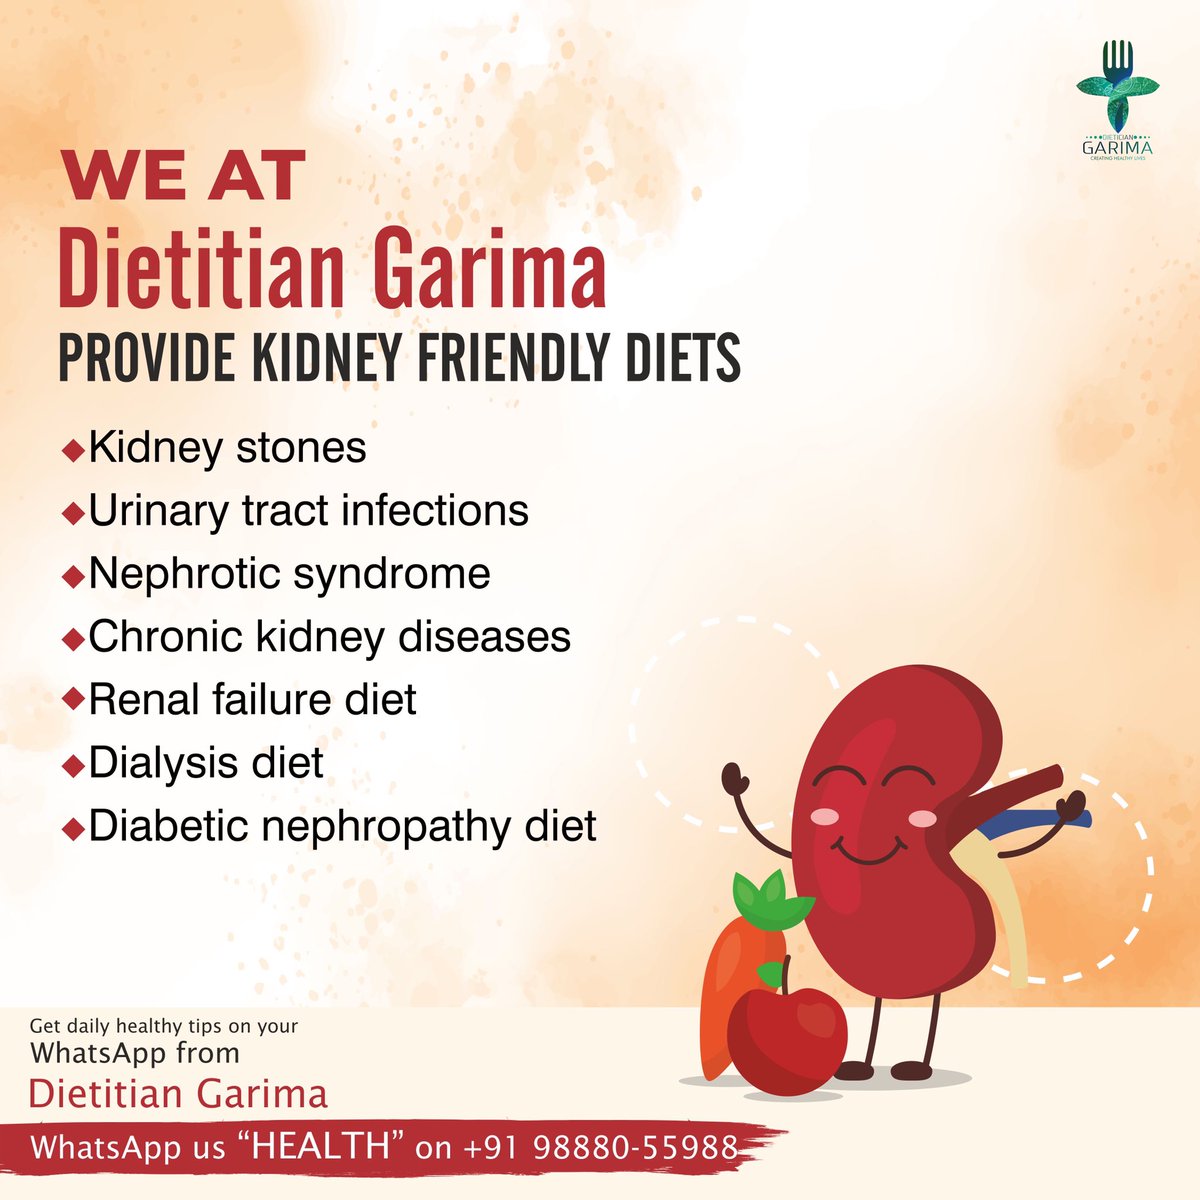 Kidney diet plan for your loved one is our area of specialities. Email or message us and get the best.

#renaldietitian #kidneyrd #renaldiet #dietplans #kidneydiet #kidneyfriendly #clinicaldietitian #rdtobe #sociohutt #dietitiangarima #garimagoyal #creatinghealthylives